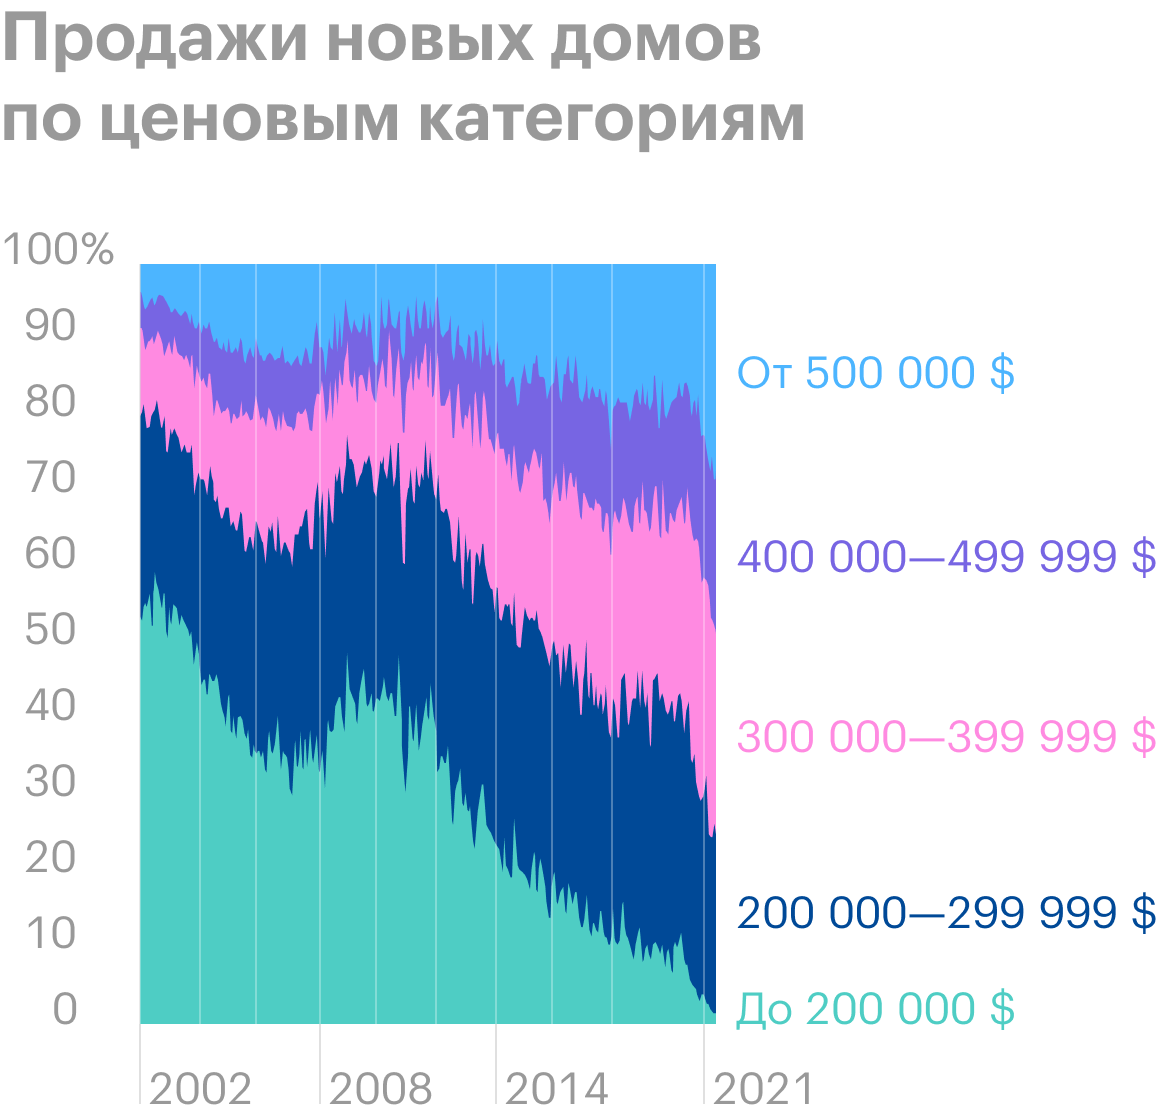 Источник: Daily Shot, The distribution of new home sales by price range